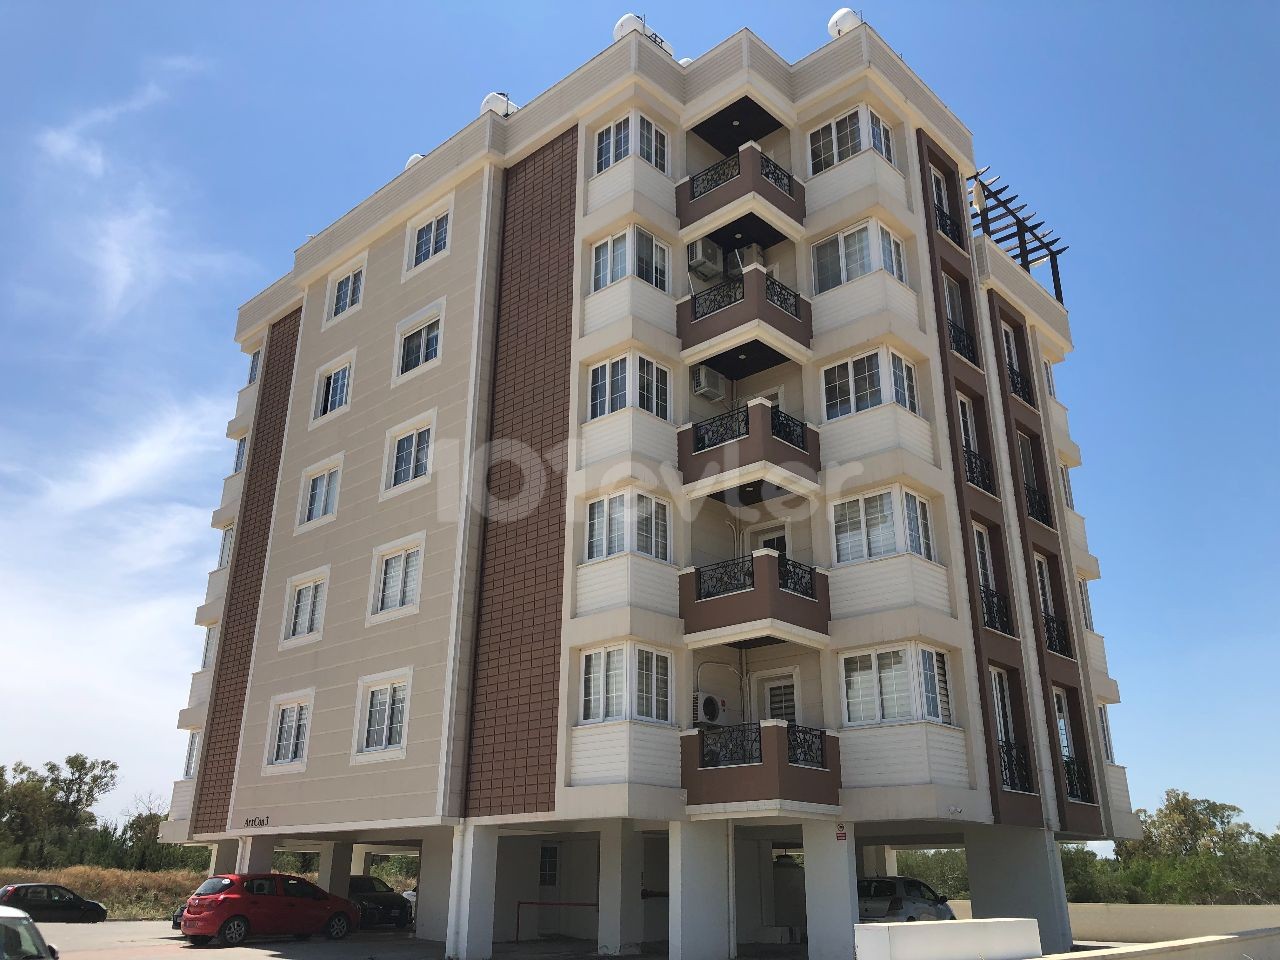 NICOSIA - DEREBOYU NEW FULLY FURNISHED PENTHOUSE WITH A VIEW OF THE BACK OF THE NEAR EAST BANK 3 + 1 ** 